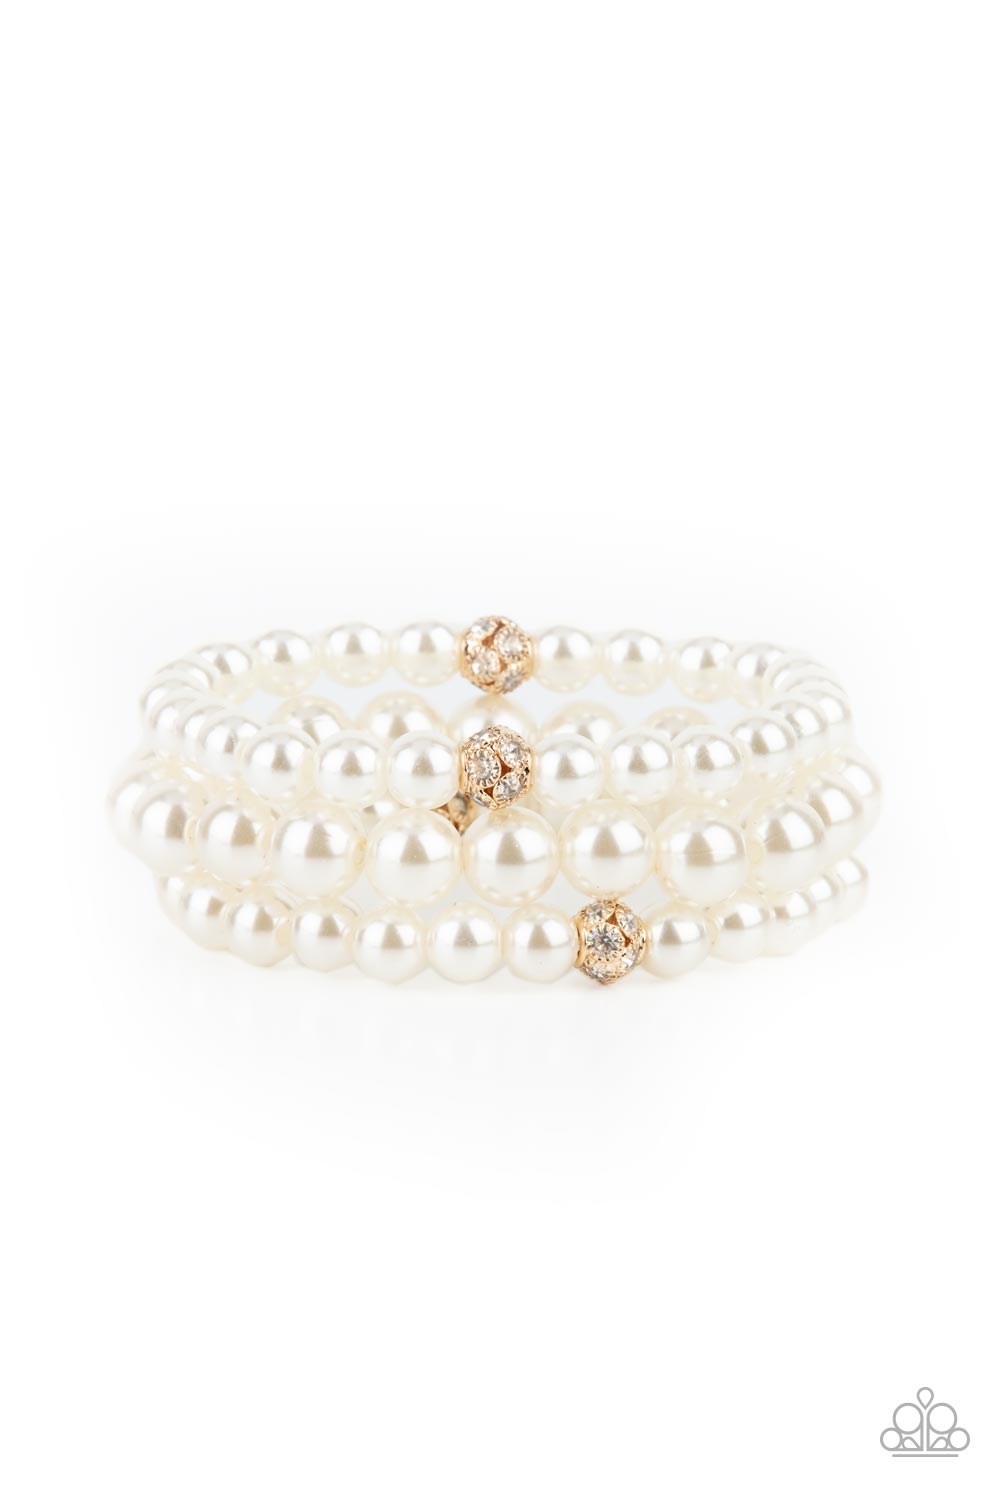 Here Comes The Heiress Gold Bracelet - Paparazzi Accessories  Infused with white rhinestone encrusted gold beads, a bubbly collection of mismatched white pearls are threaded along stretchy bands around the wrist for a vintage inspired layered look.  All Paparazzi Accessories are lead free and nickel free!  Sold as one set of three bracelets.